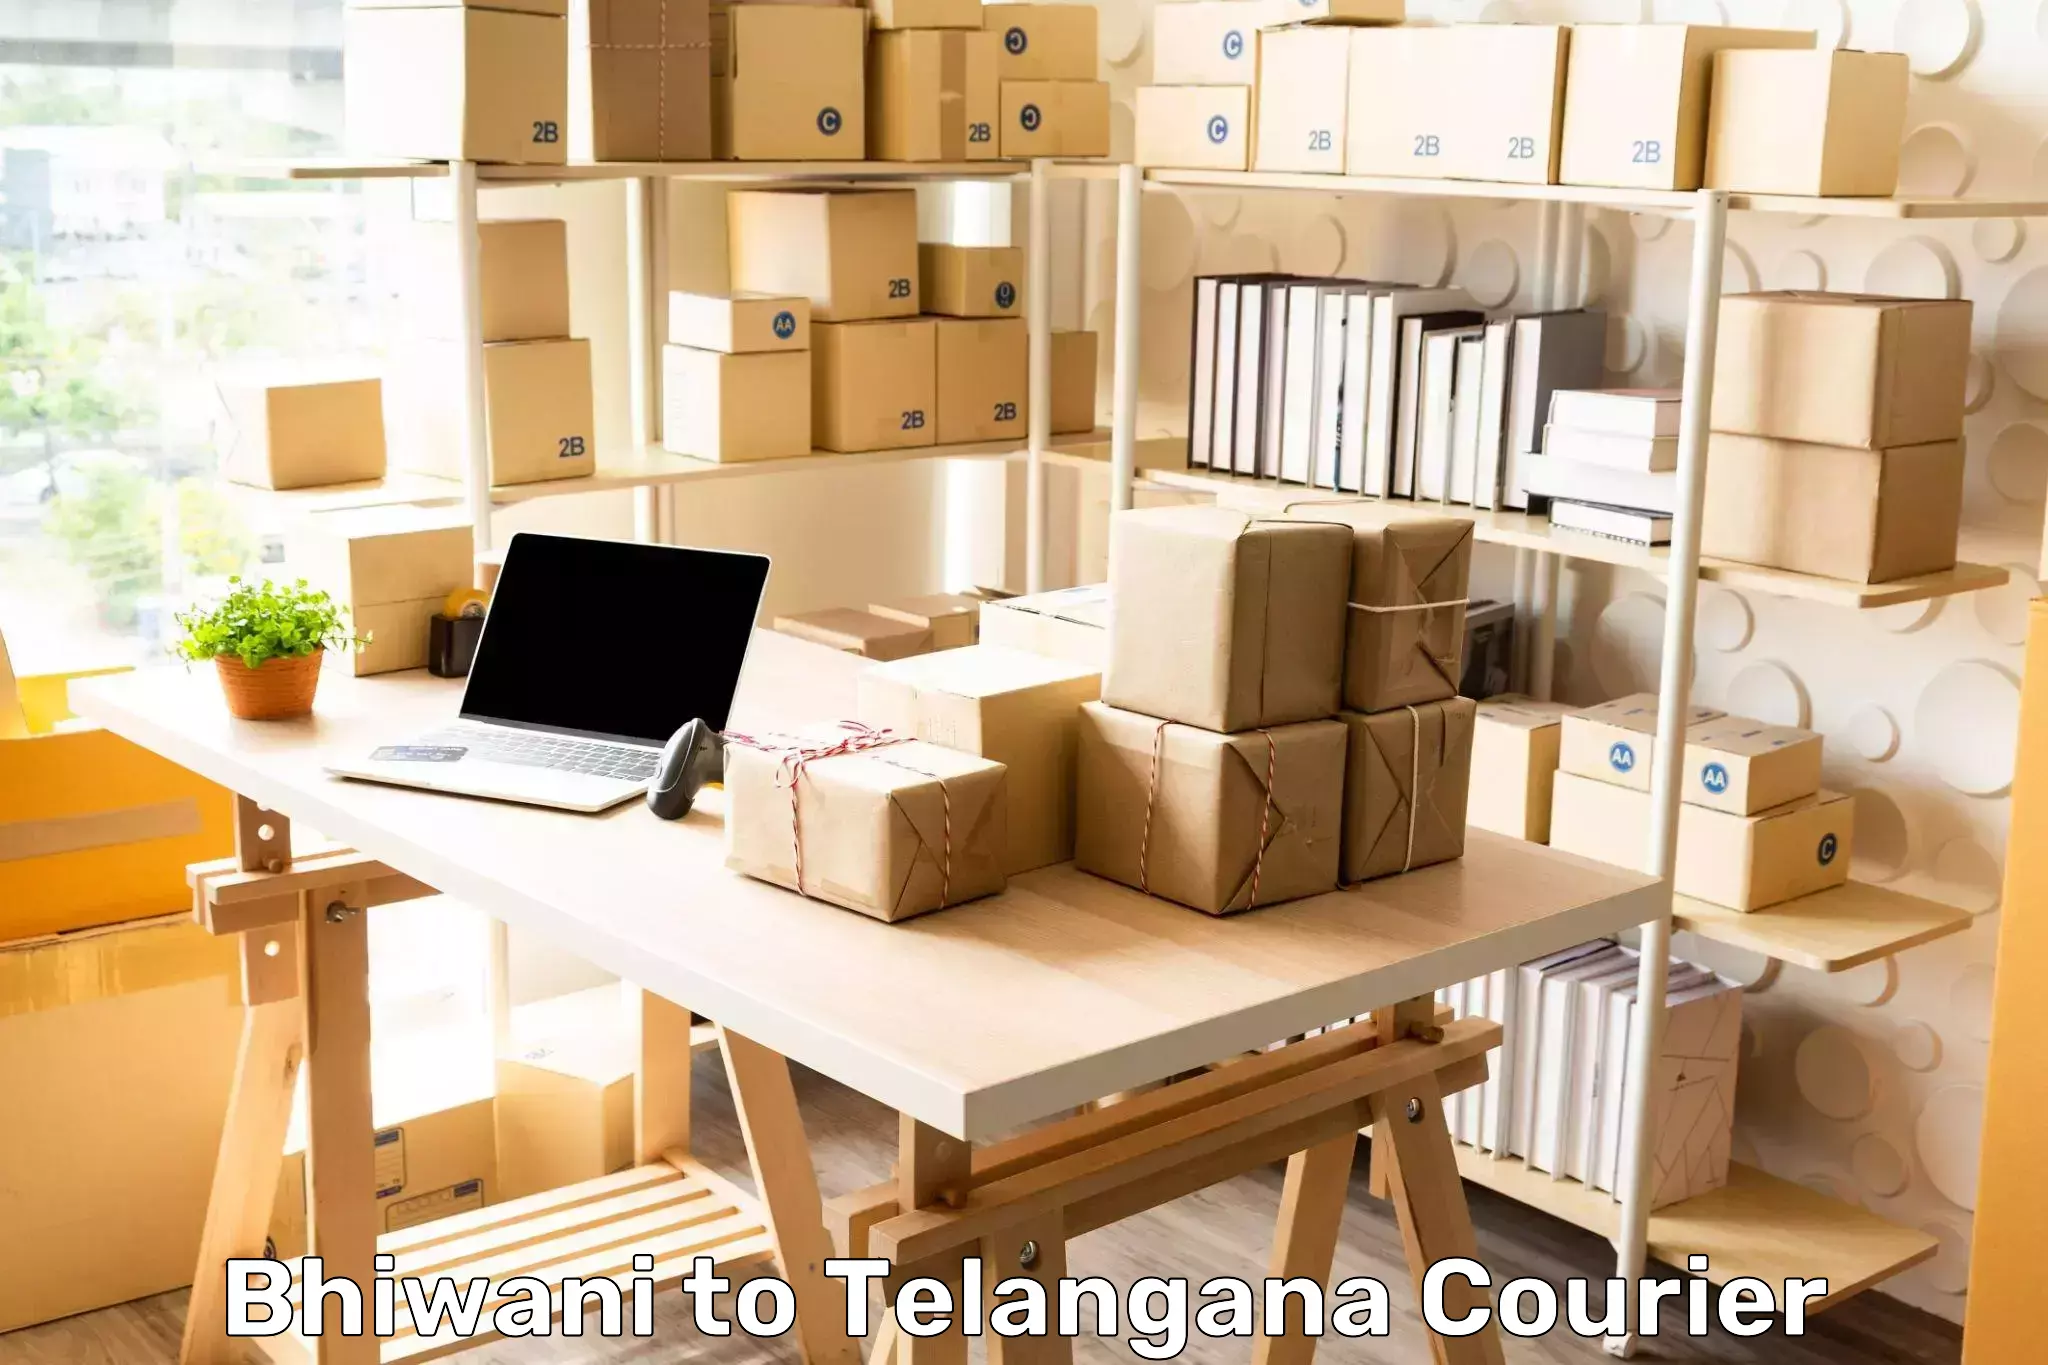 Cost-effective courier options Bhiwani to Chandur